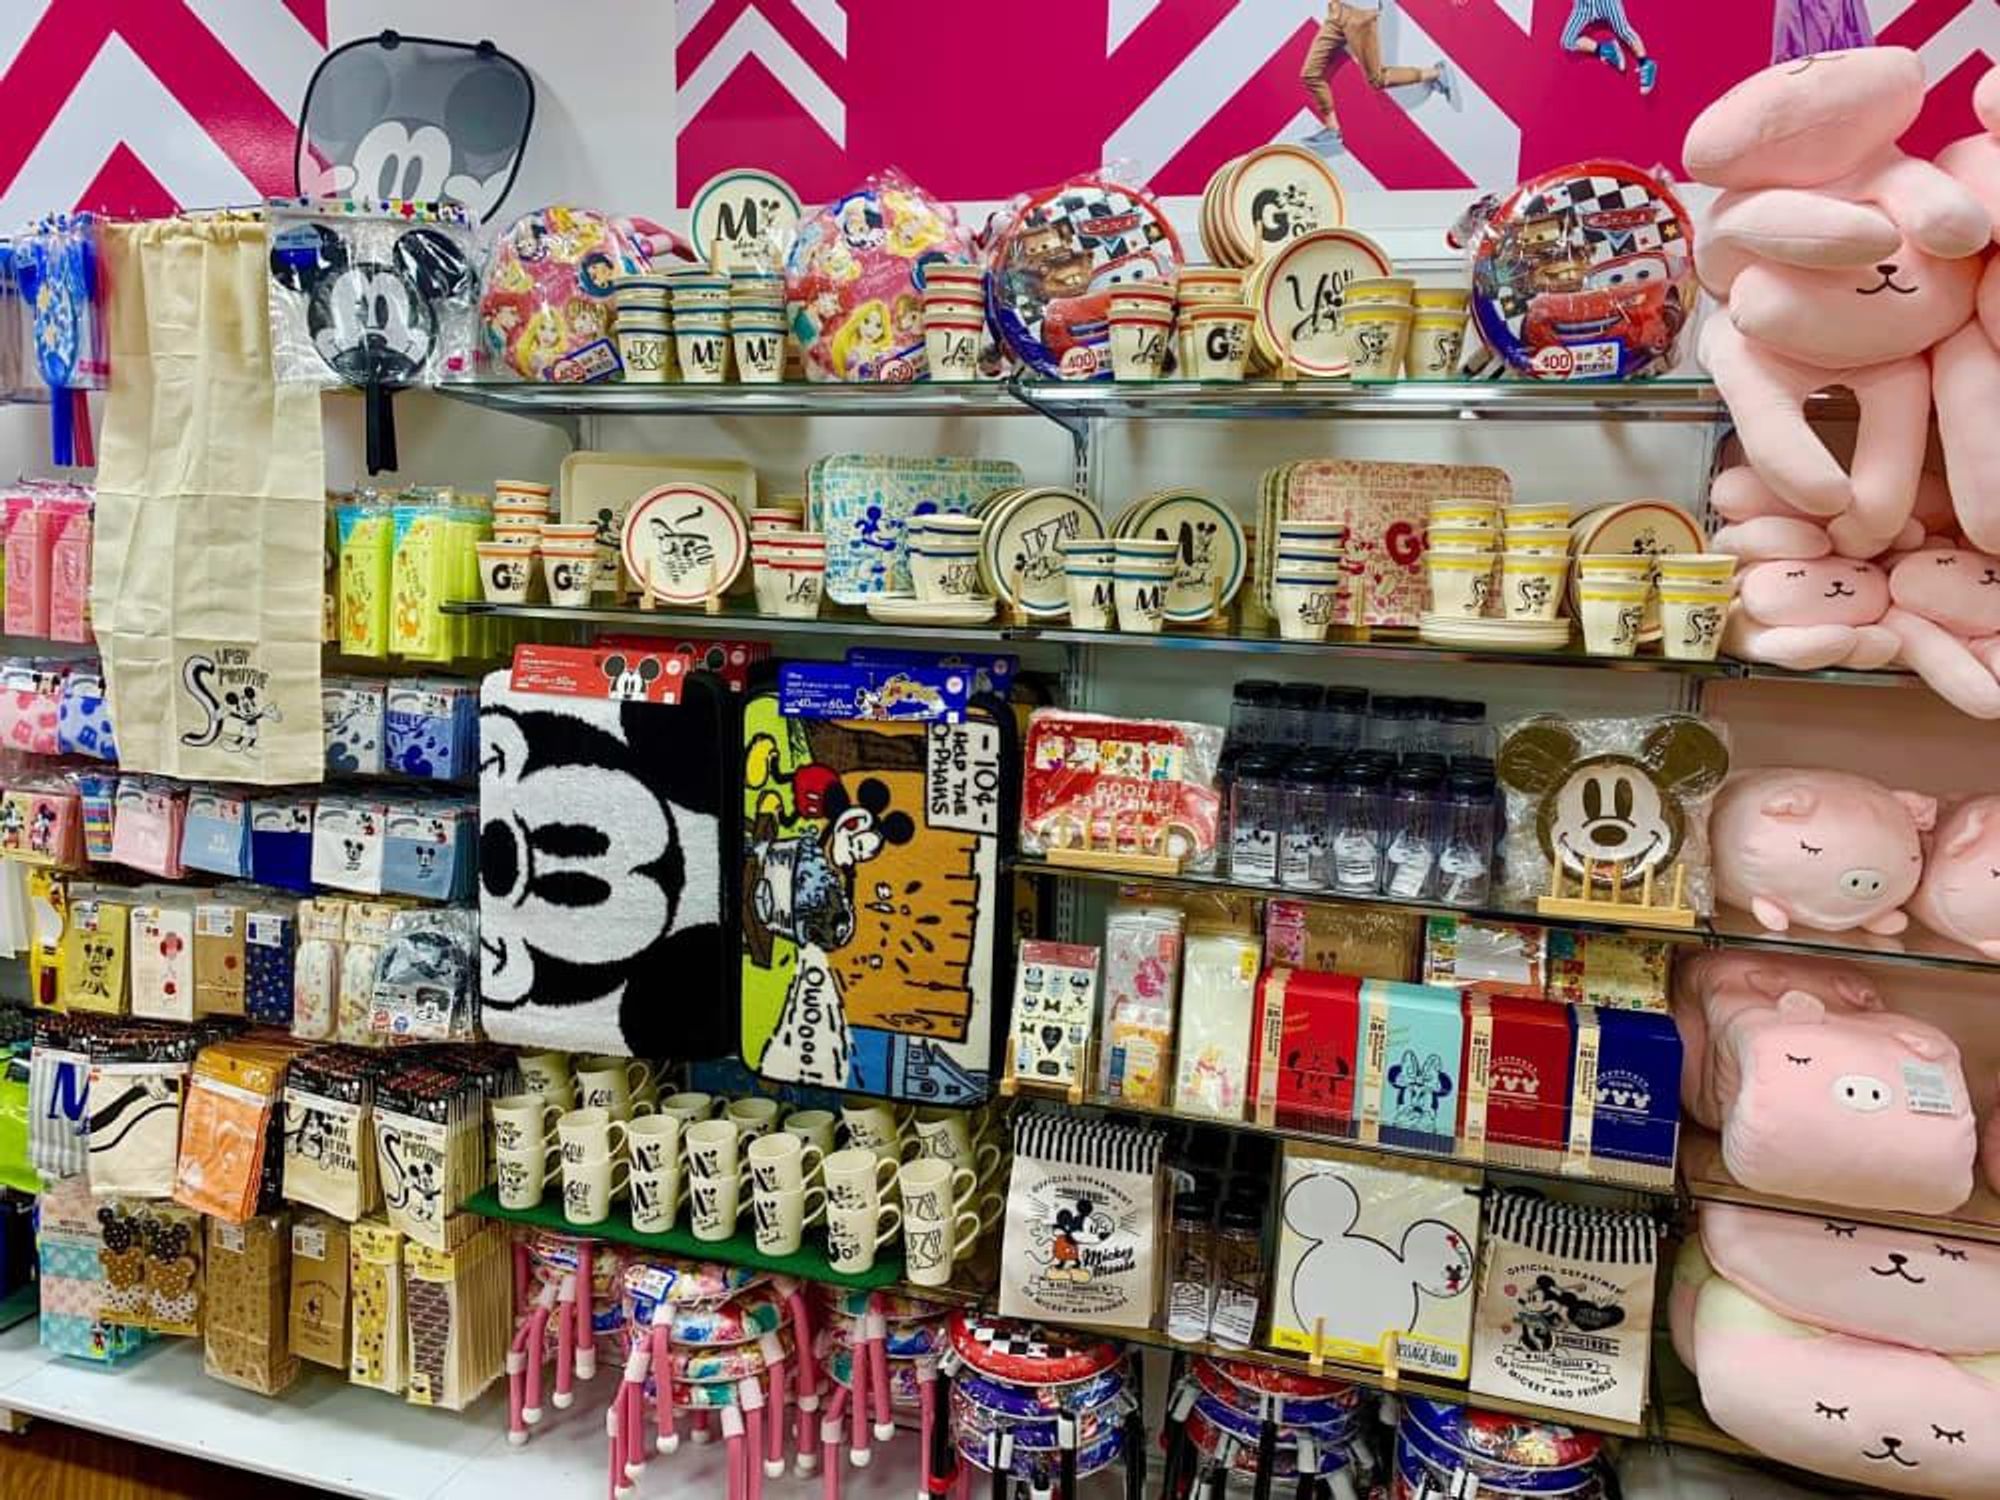 Japanese dollar store Daiso to open 2 DFW stores including Dallas